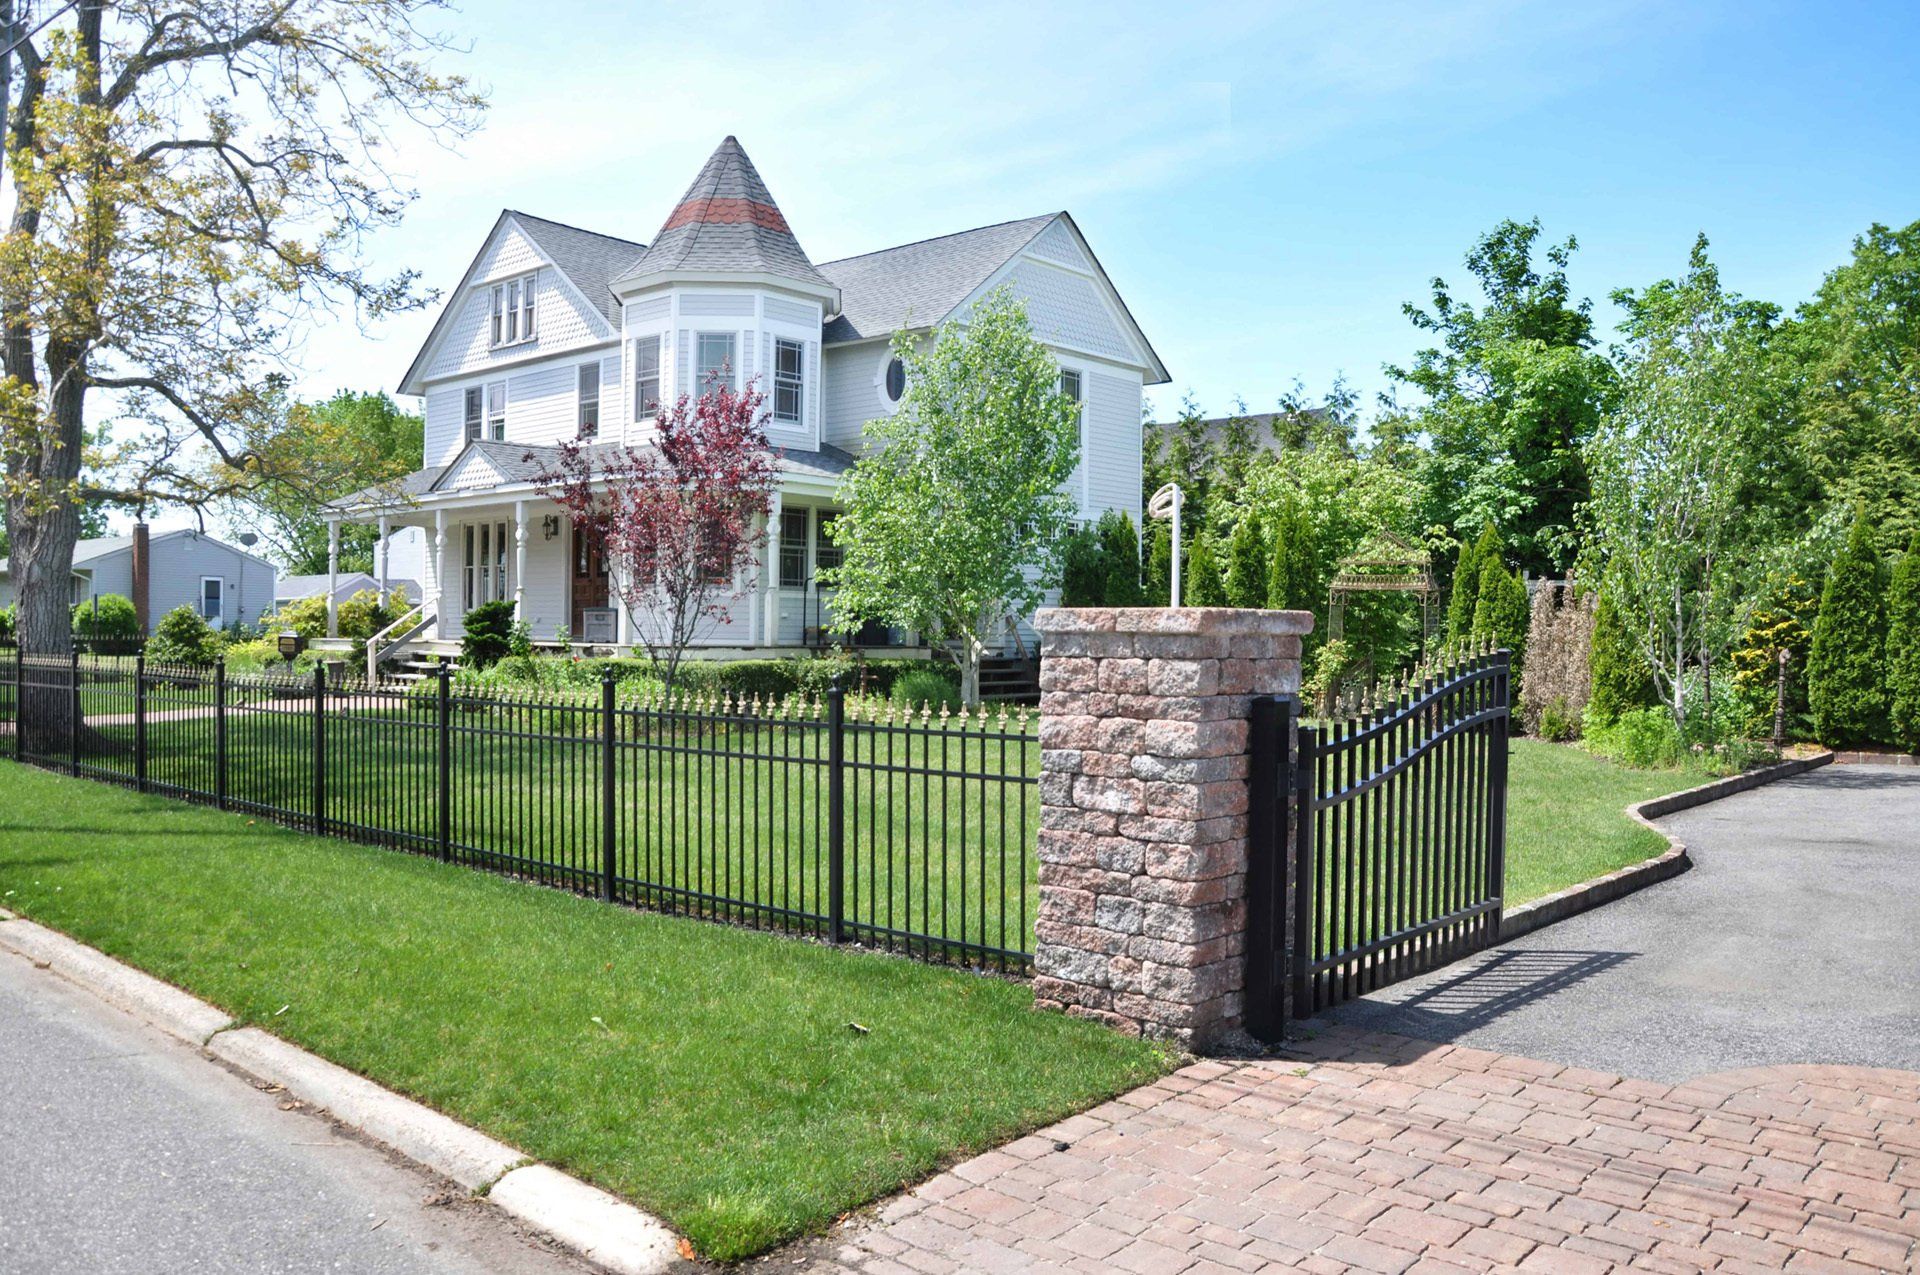 About Fence Companies Lincoln NE